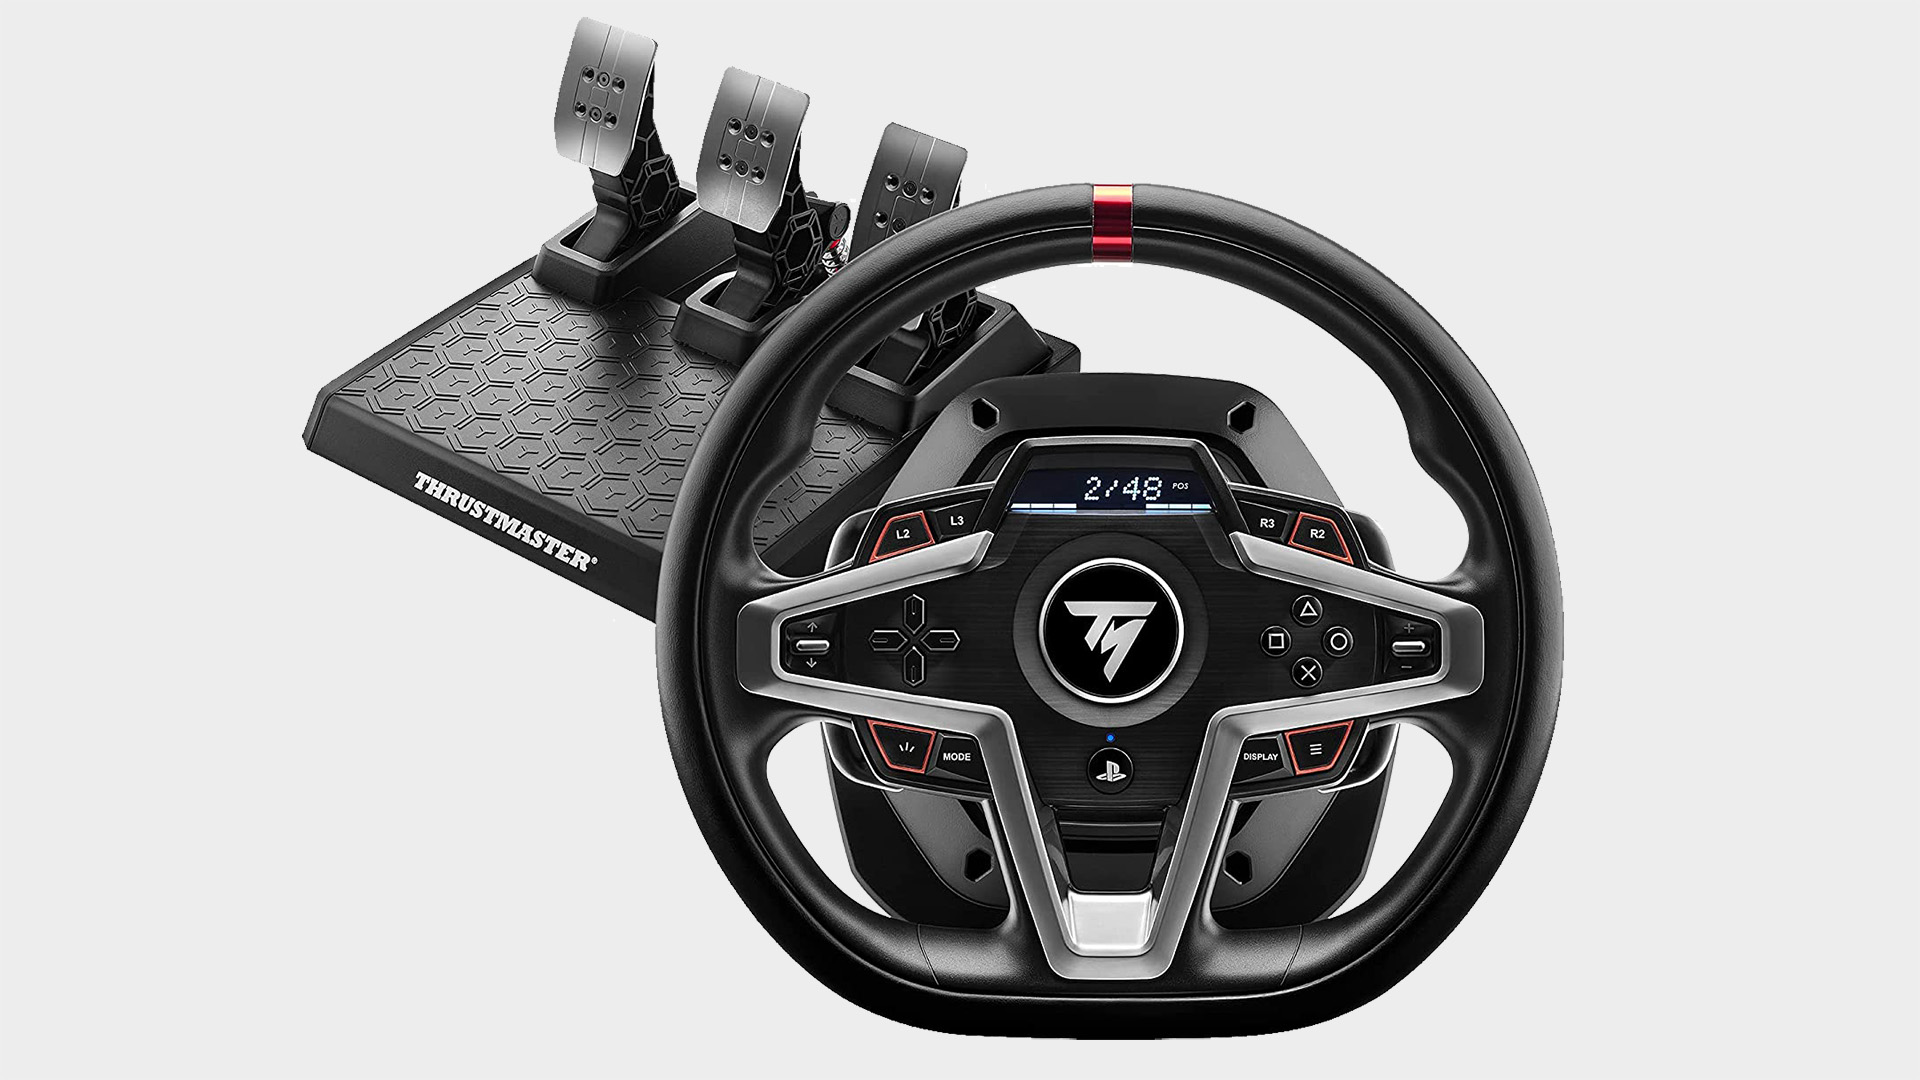 Thrustmaster T248 Racing Wheel With Pedal